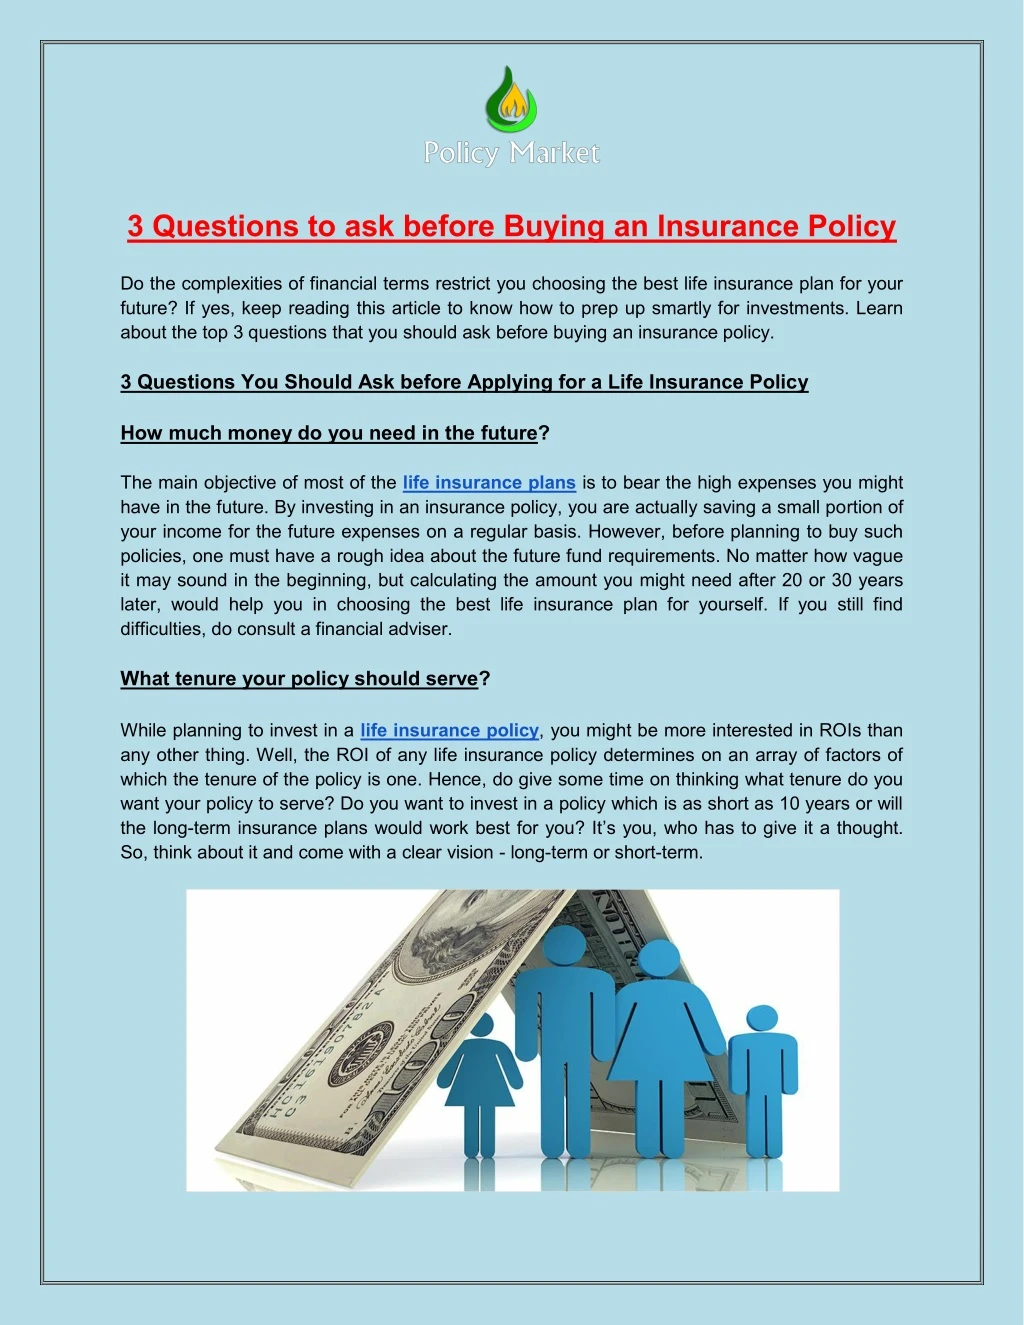 3 questions to ask before buying an insurance